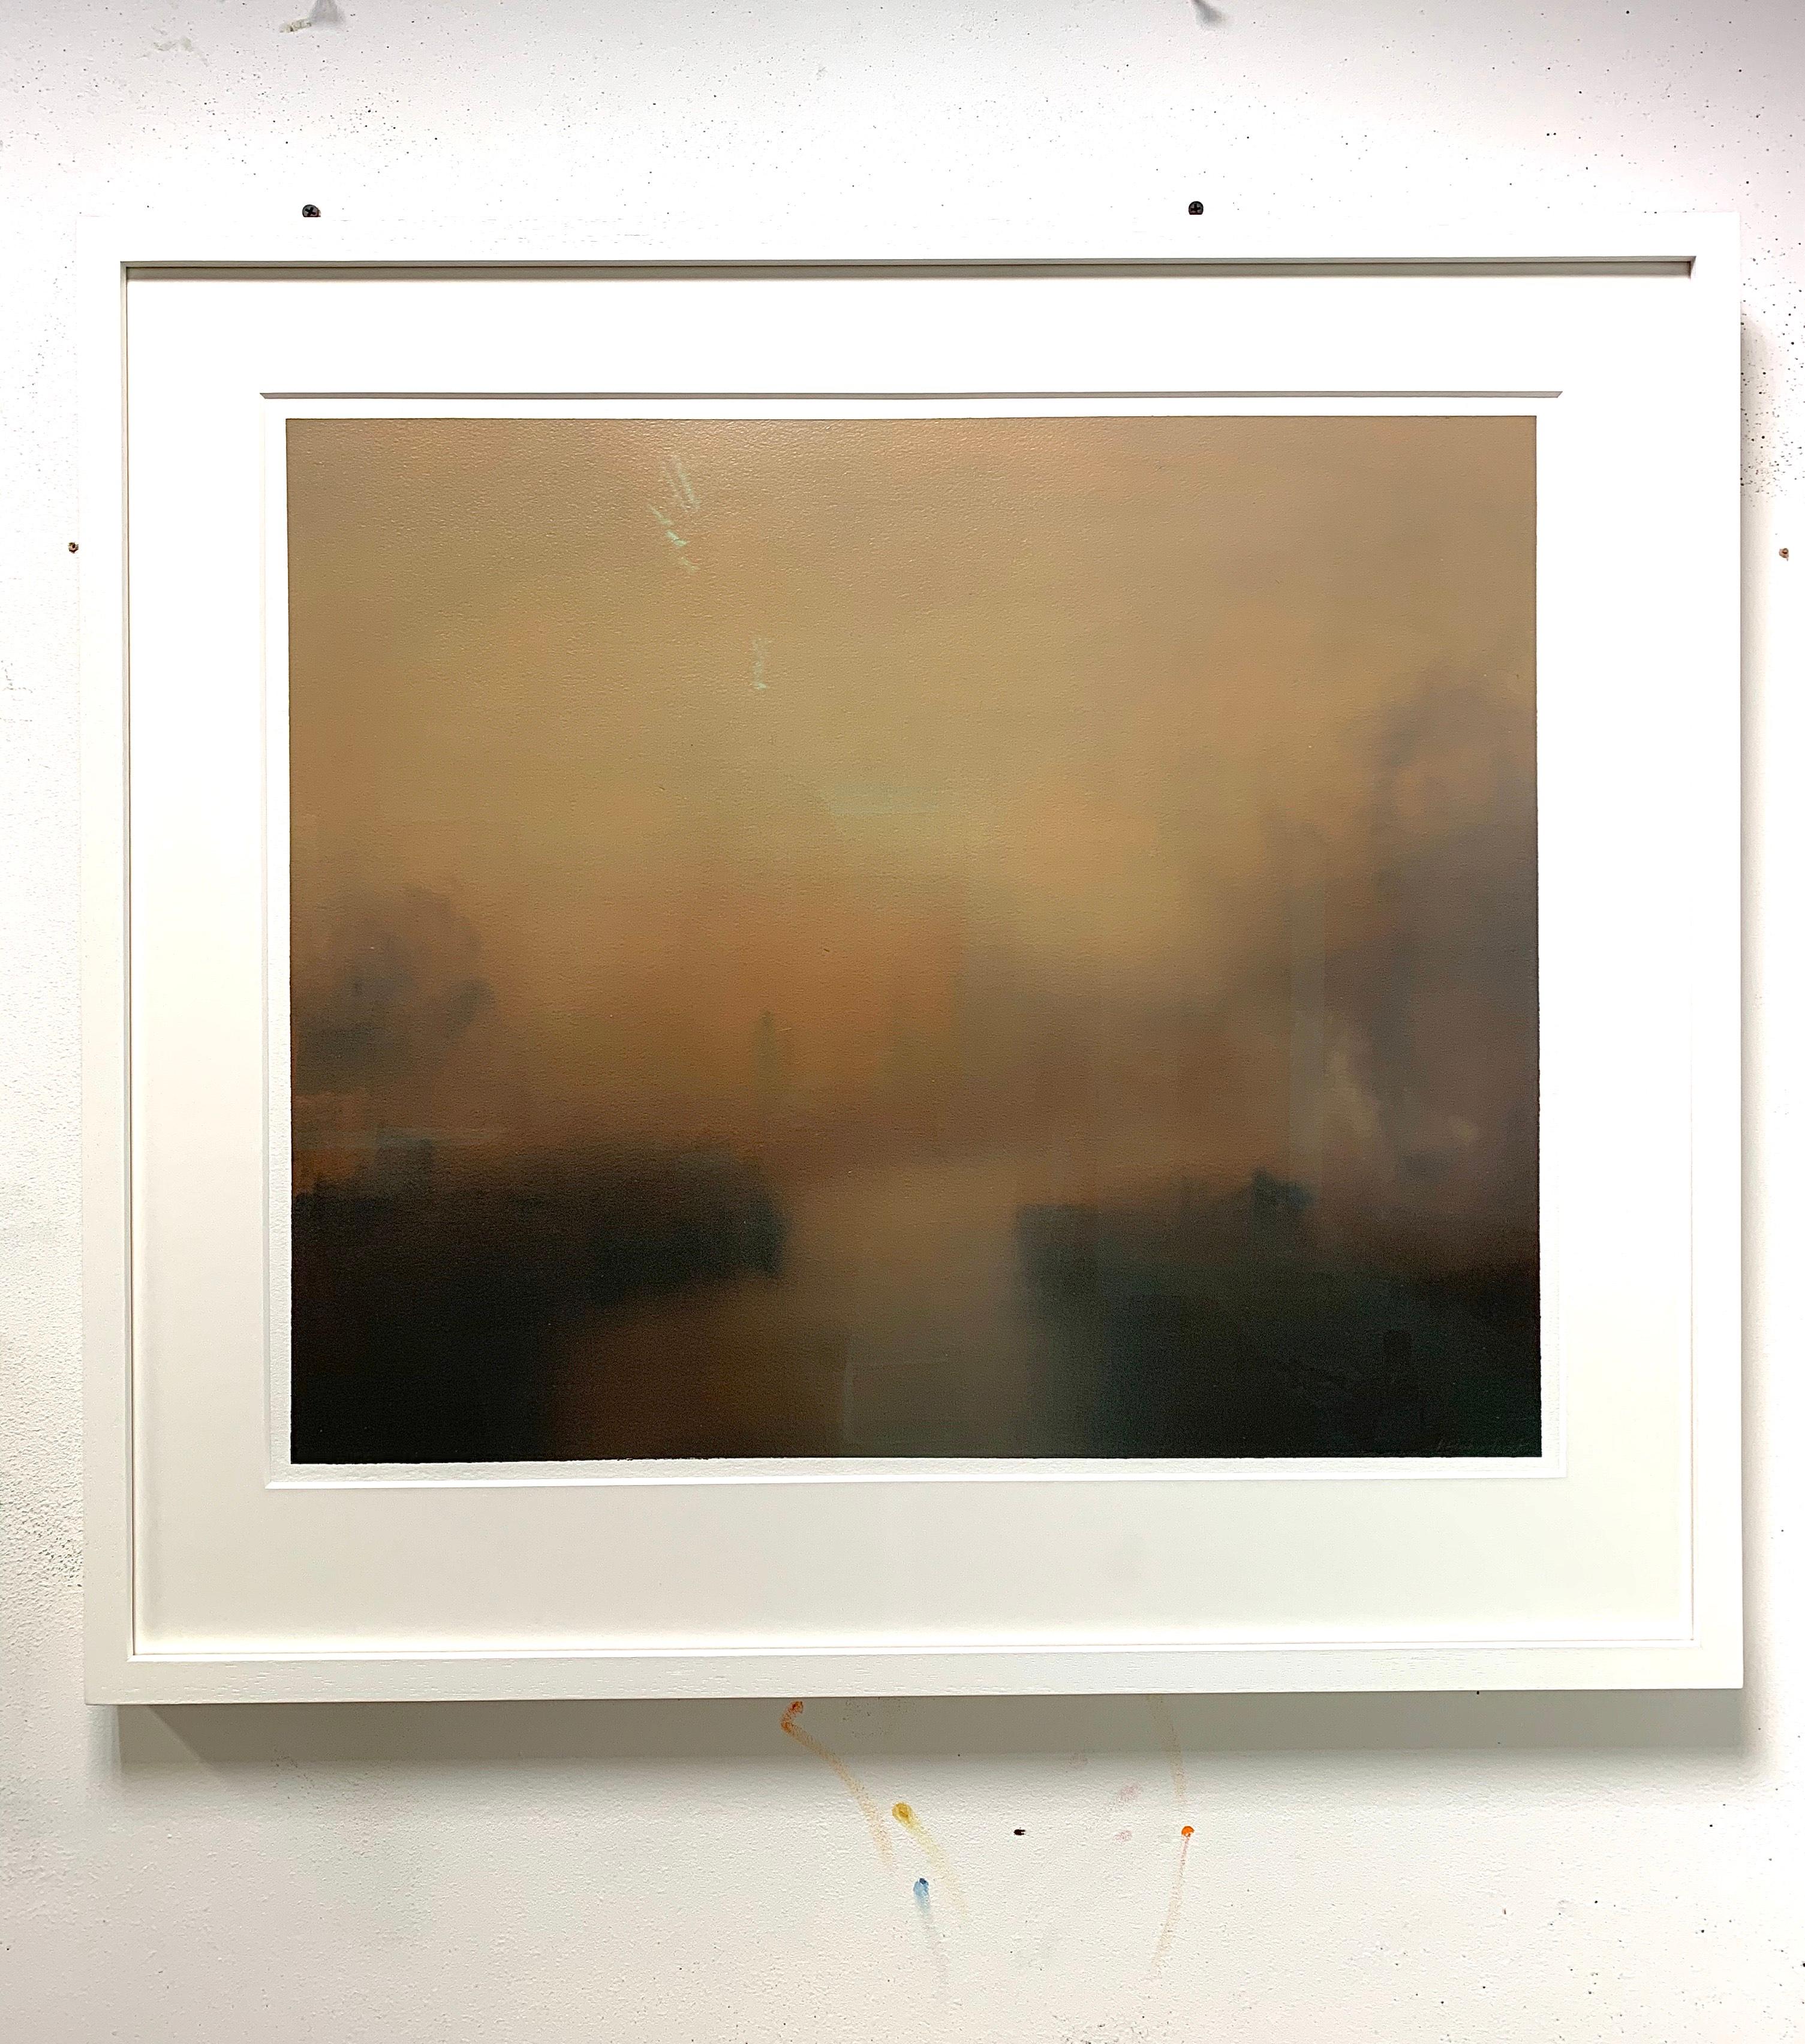 Richard Whadcock
Early Hours
Original Landscape Drawing
Oil on Paper
Sold Framed Slightly Off white with museum quality non-reflective glass and archival mount
Free Shipping
Please note that in situ images are purely an indication of how a piece may